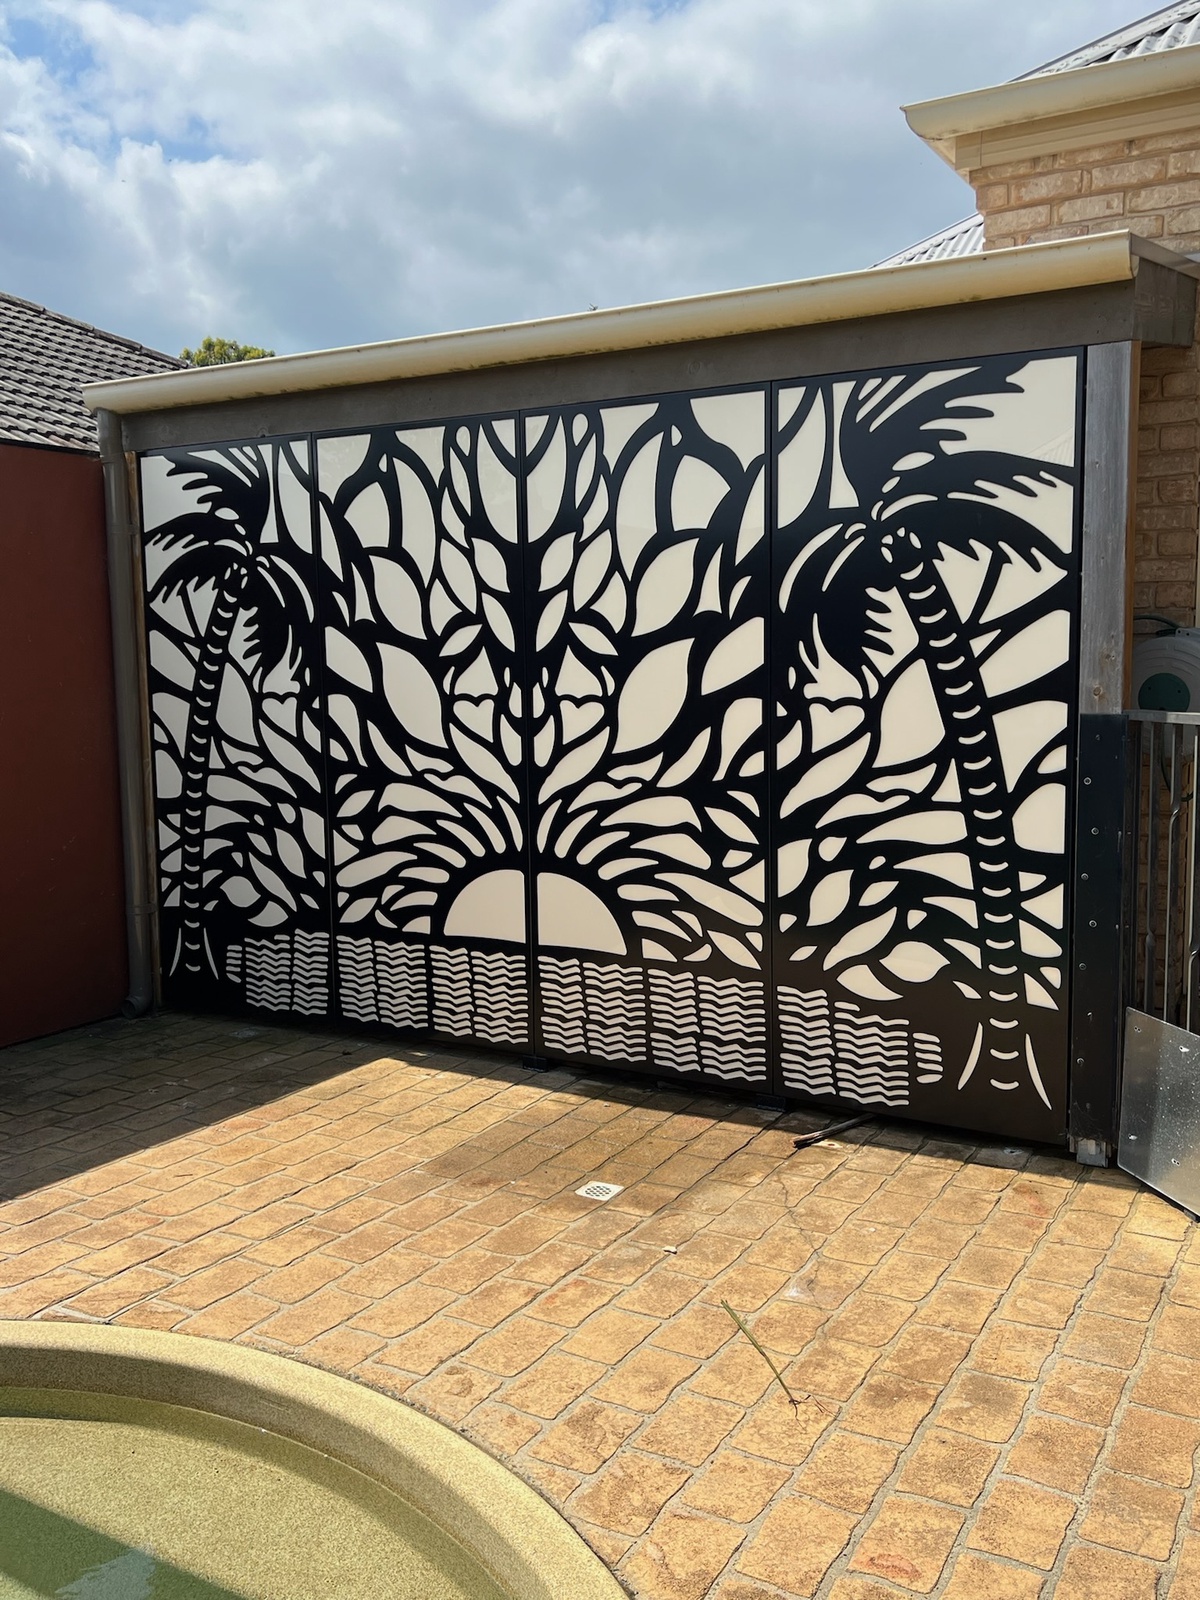 Creative Ways to Use Decorative Metal Screens in Your Home